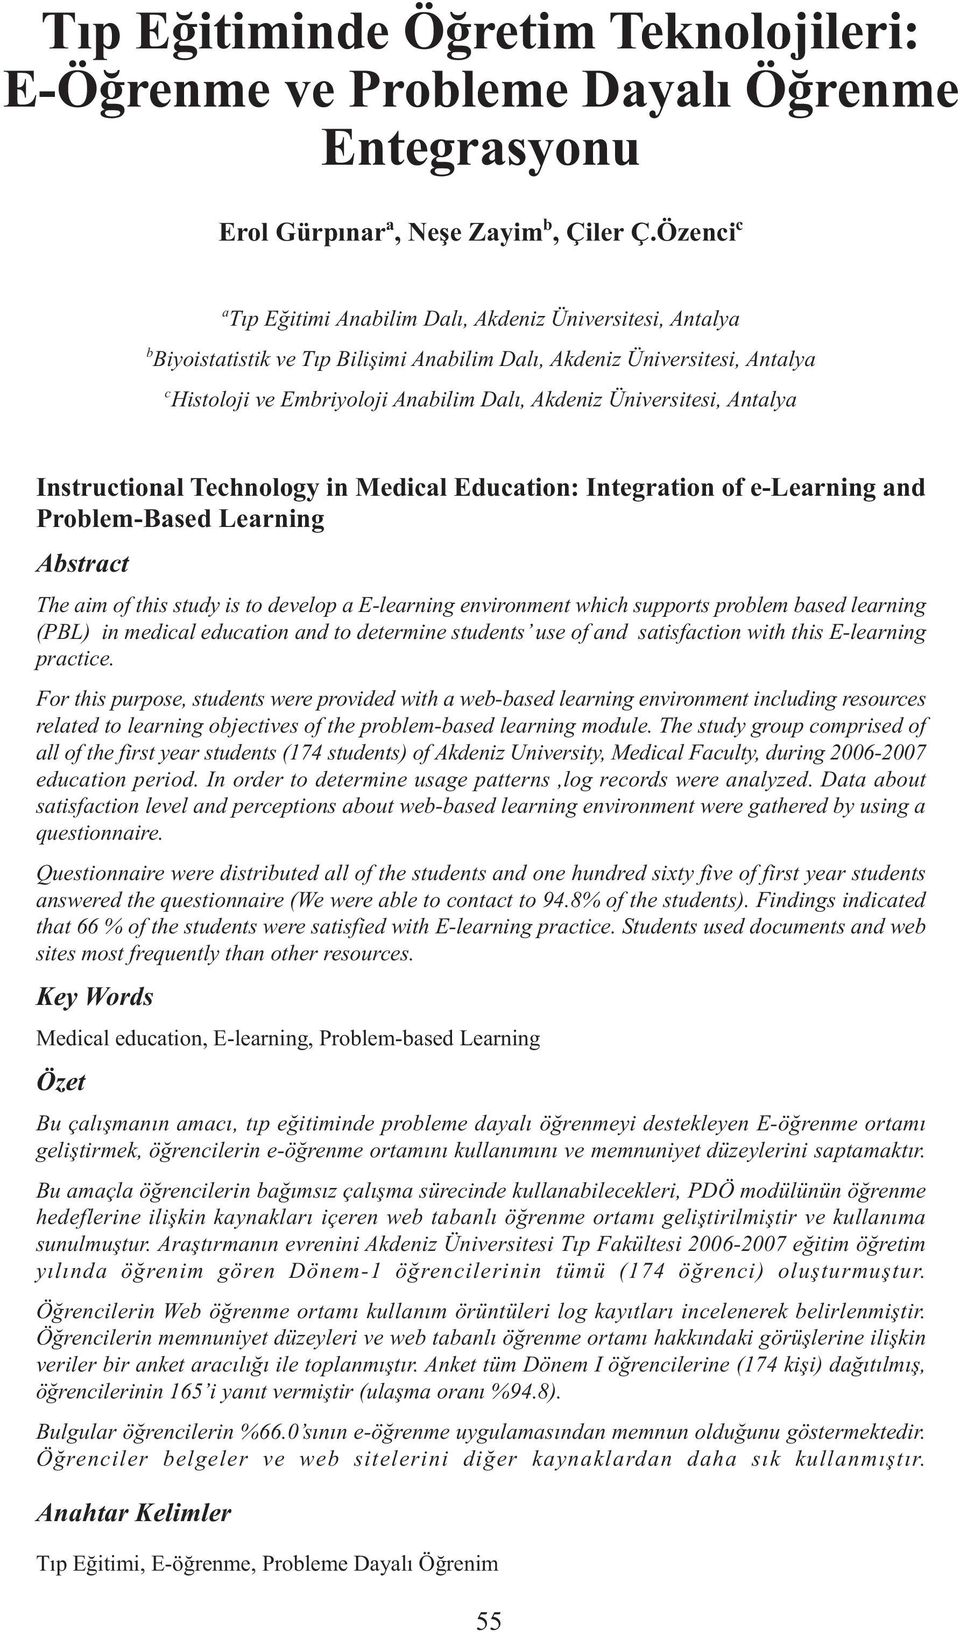 Üniversitesi, Antalya Instructional Technology in Medical Education: Integration of e-learning and Problem-Based Learning Abstract The aim of this study is to develop a E-learning environment which